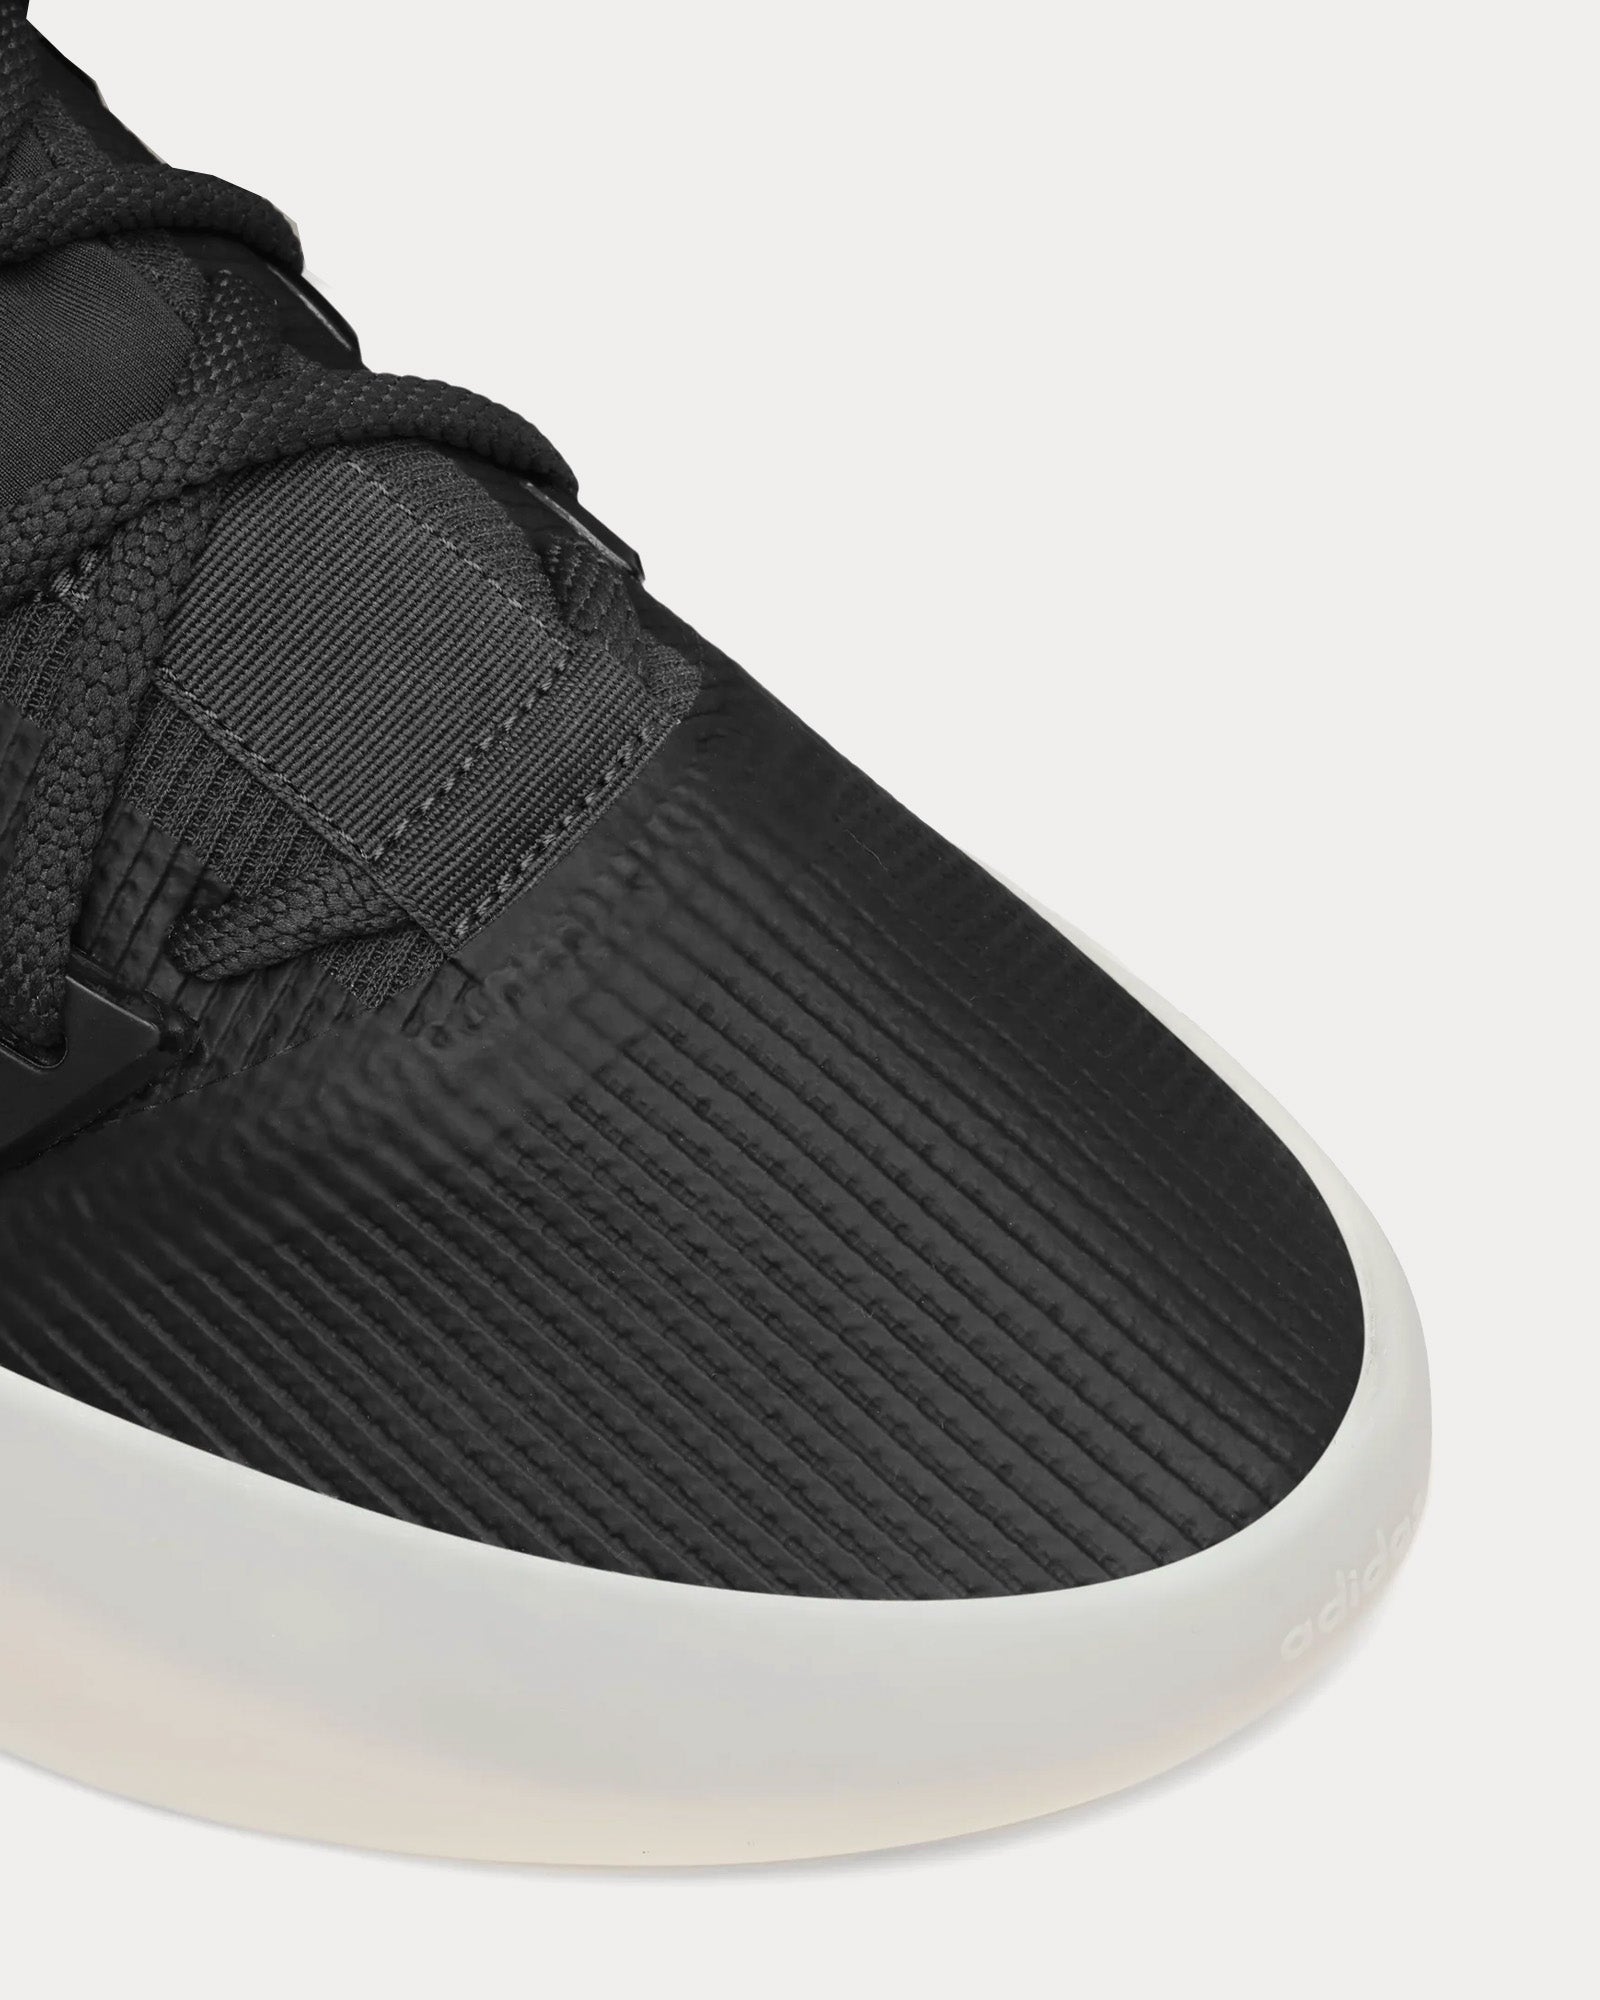 Fear of God Athletics - I Basketball Carbon / Carbon High Top Sneakers